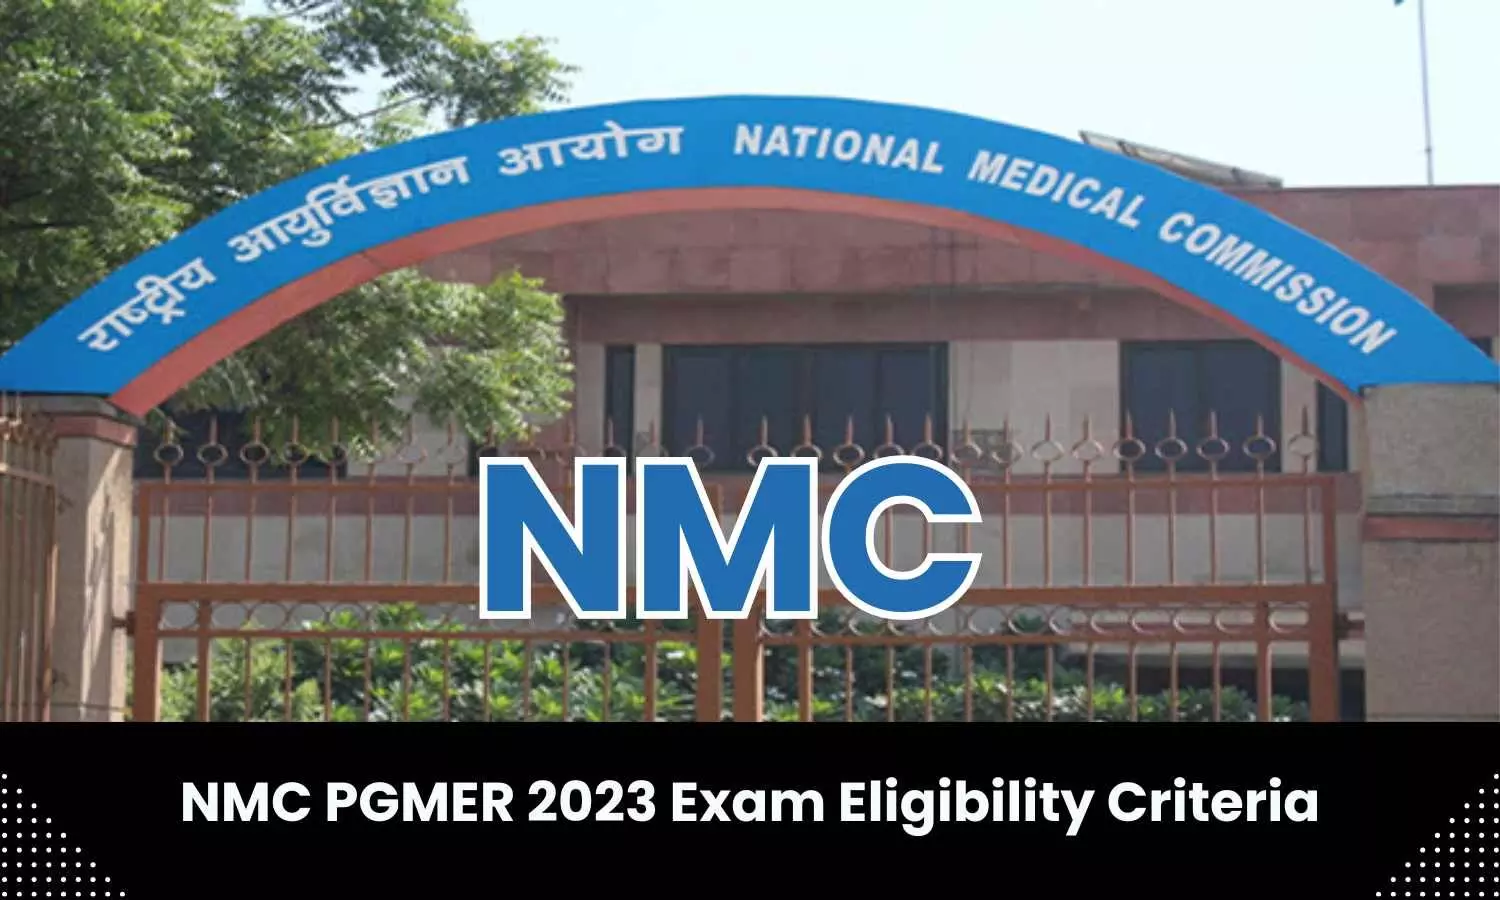 PGMER 2023: NMC specifies conditions to be fulfilled by PG medicos to appear in final exam, details